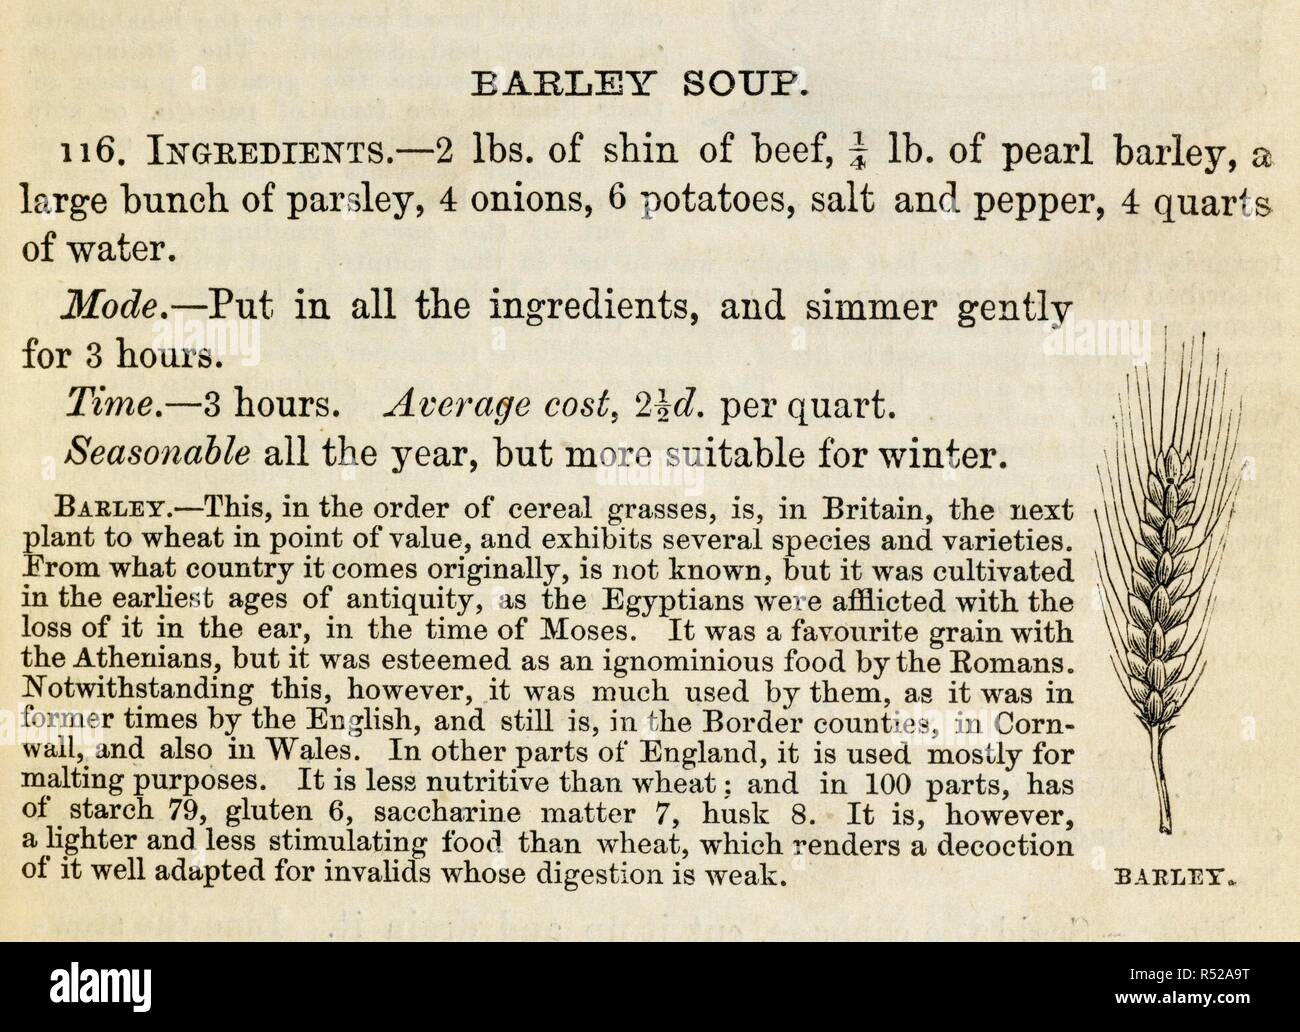 Recipe for barley soup. The Book of Household Management, etc. [With plates and illustrations.]. London : S. O. Beeton, 1861. Source: C.194.a.507 p.61. Author: BEETON, ISABELLA MARY. ANON. Stock Photo